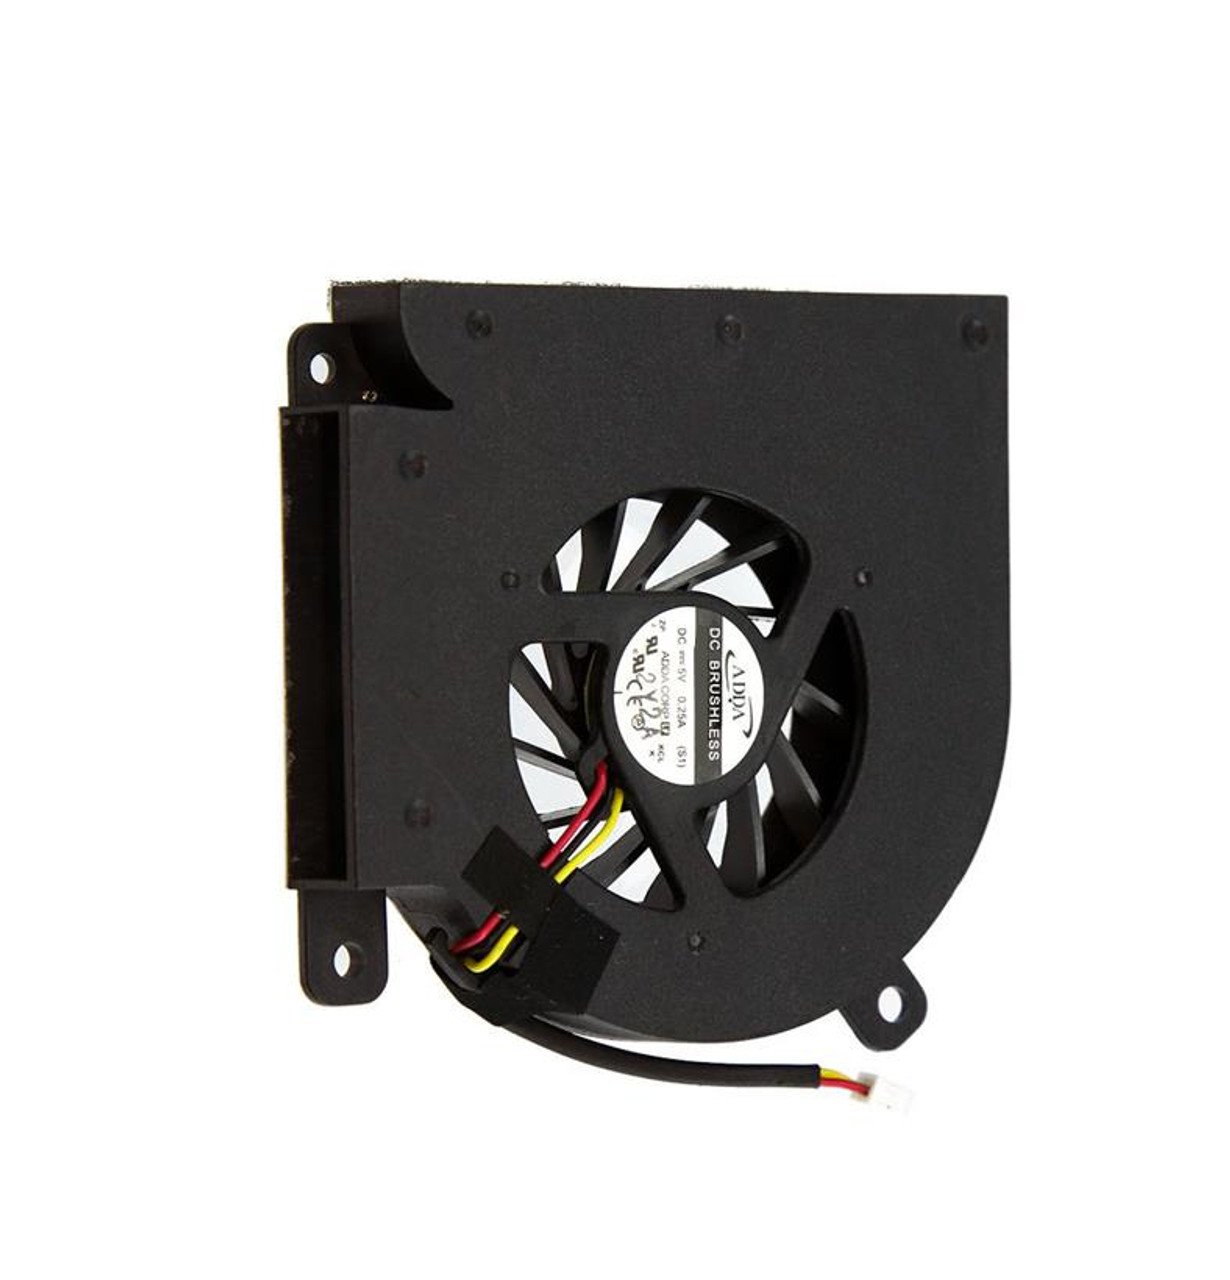 AB7505HX-EB3 Acer CPU Cooling Fan for Aspire 1500